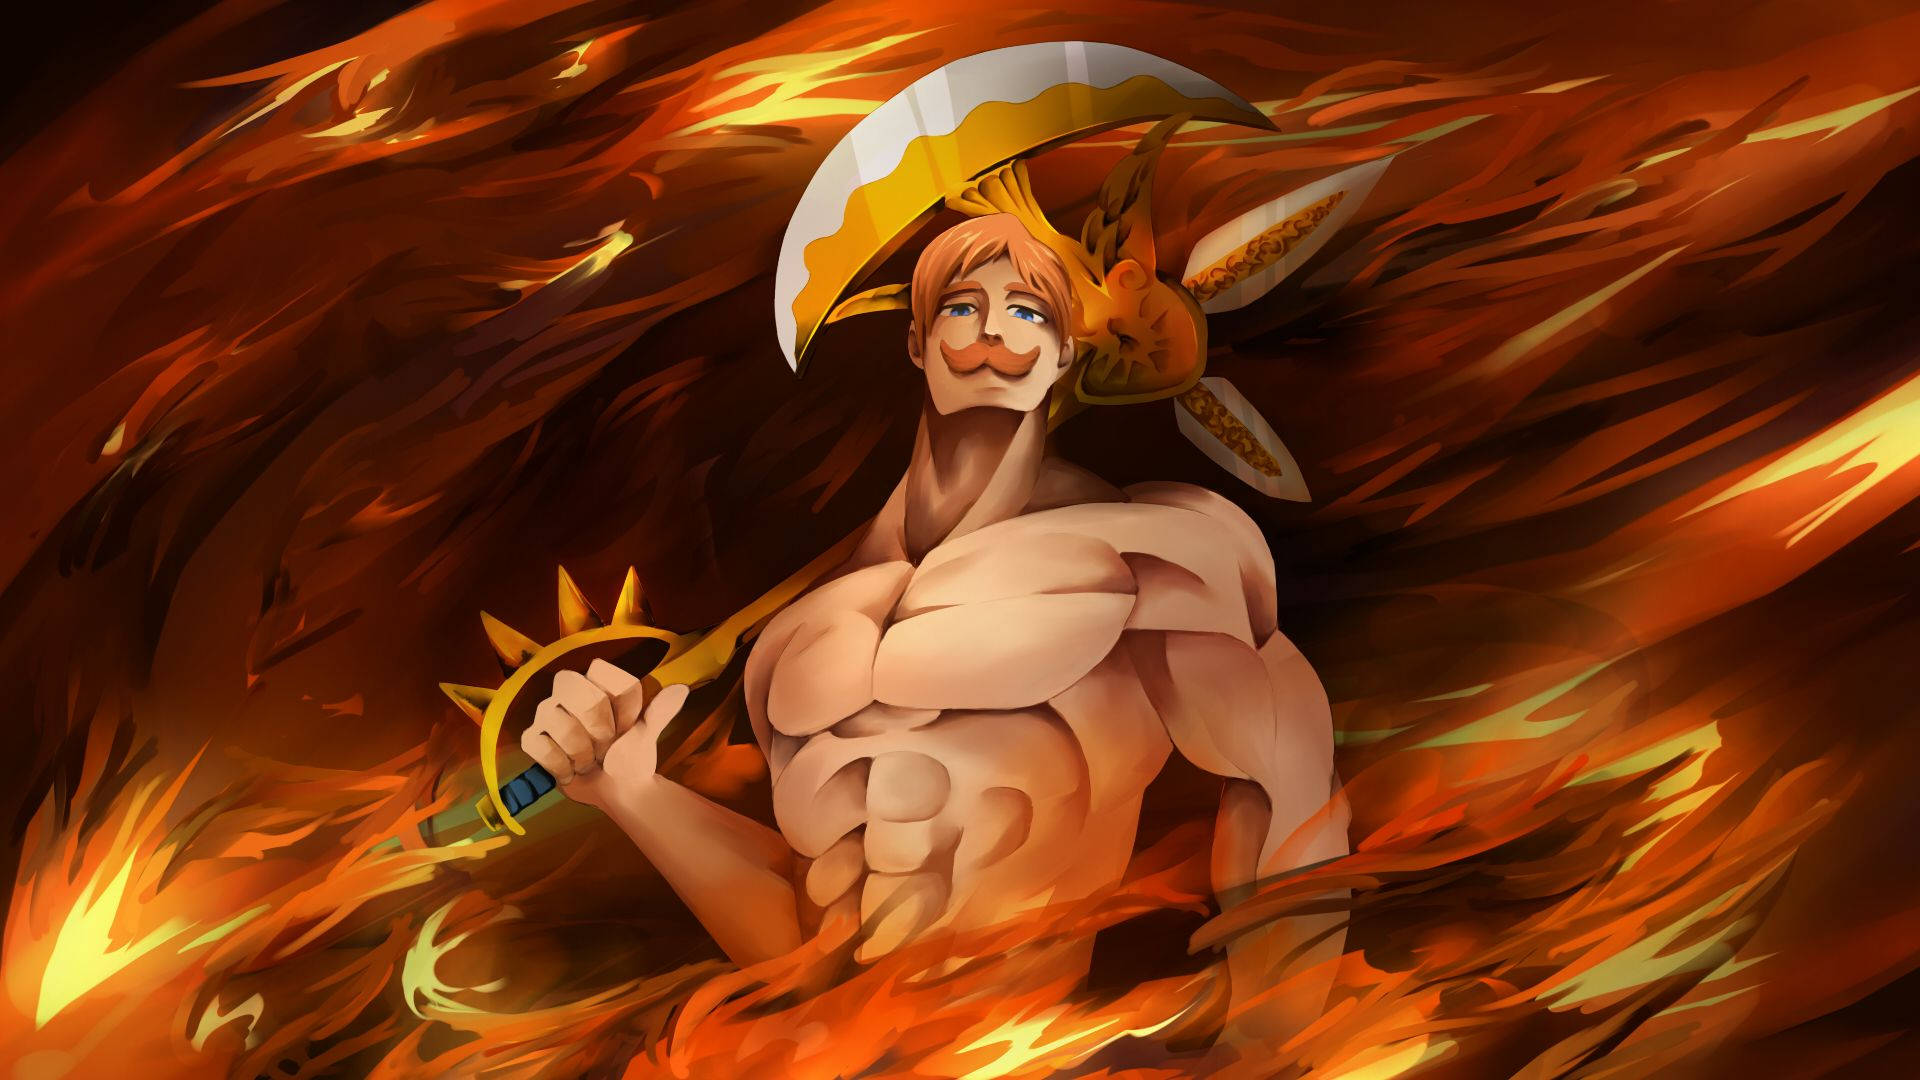 1920X1080 Escanor Wallpaper and Background